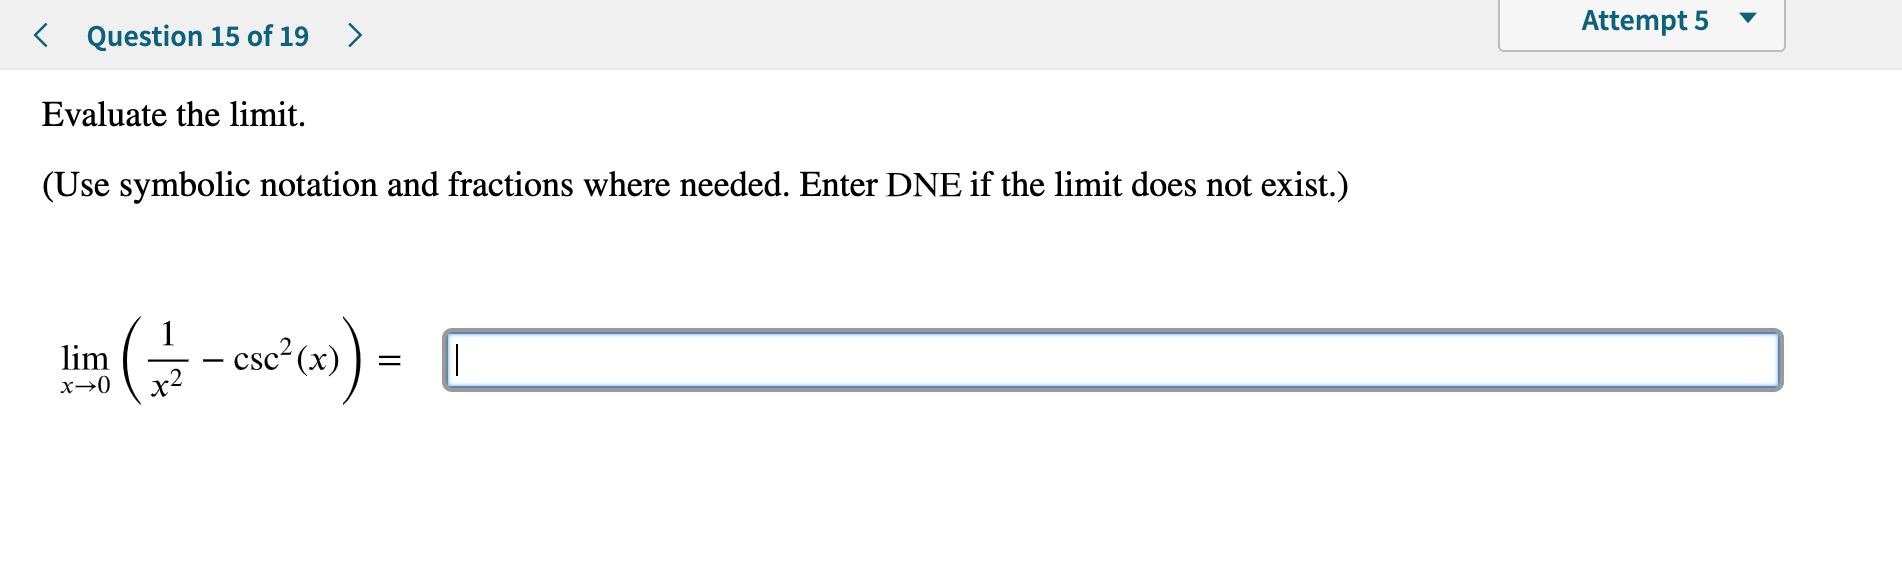 Attempt 5
>
Question 15 of 19
Evaluate the limit.
(Use symbolic notation and fractions where needed. Enter DNE if the limit does not exist.)
-Cse (x))
lim
х—0
х
